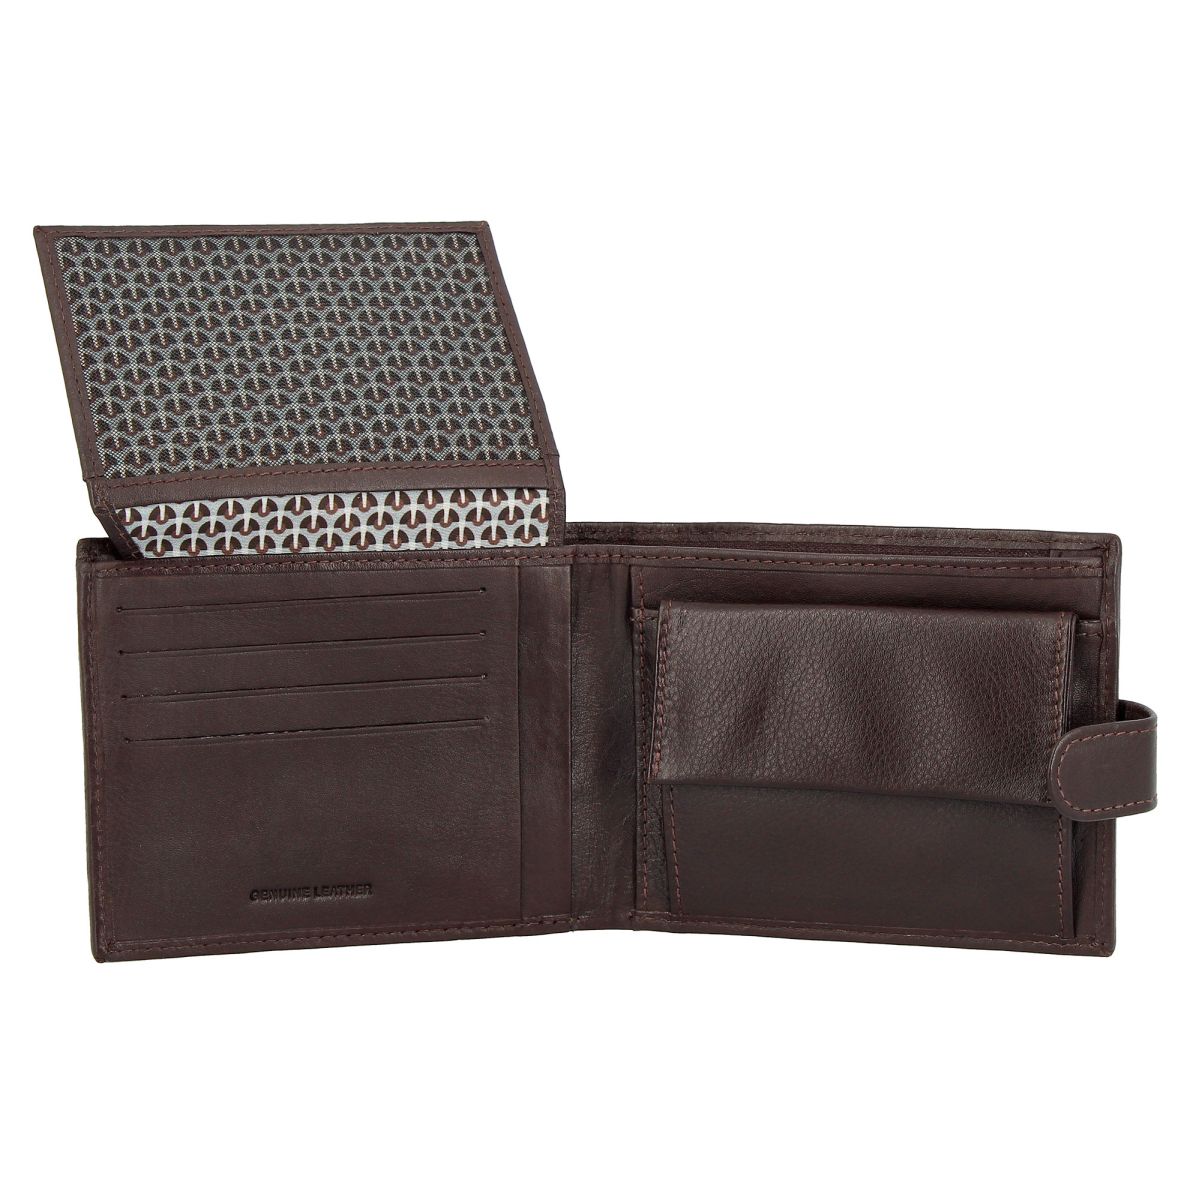 NUVOLA PELLE Mens Leather Wallet With Snap Button Dark Brown